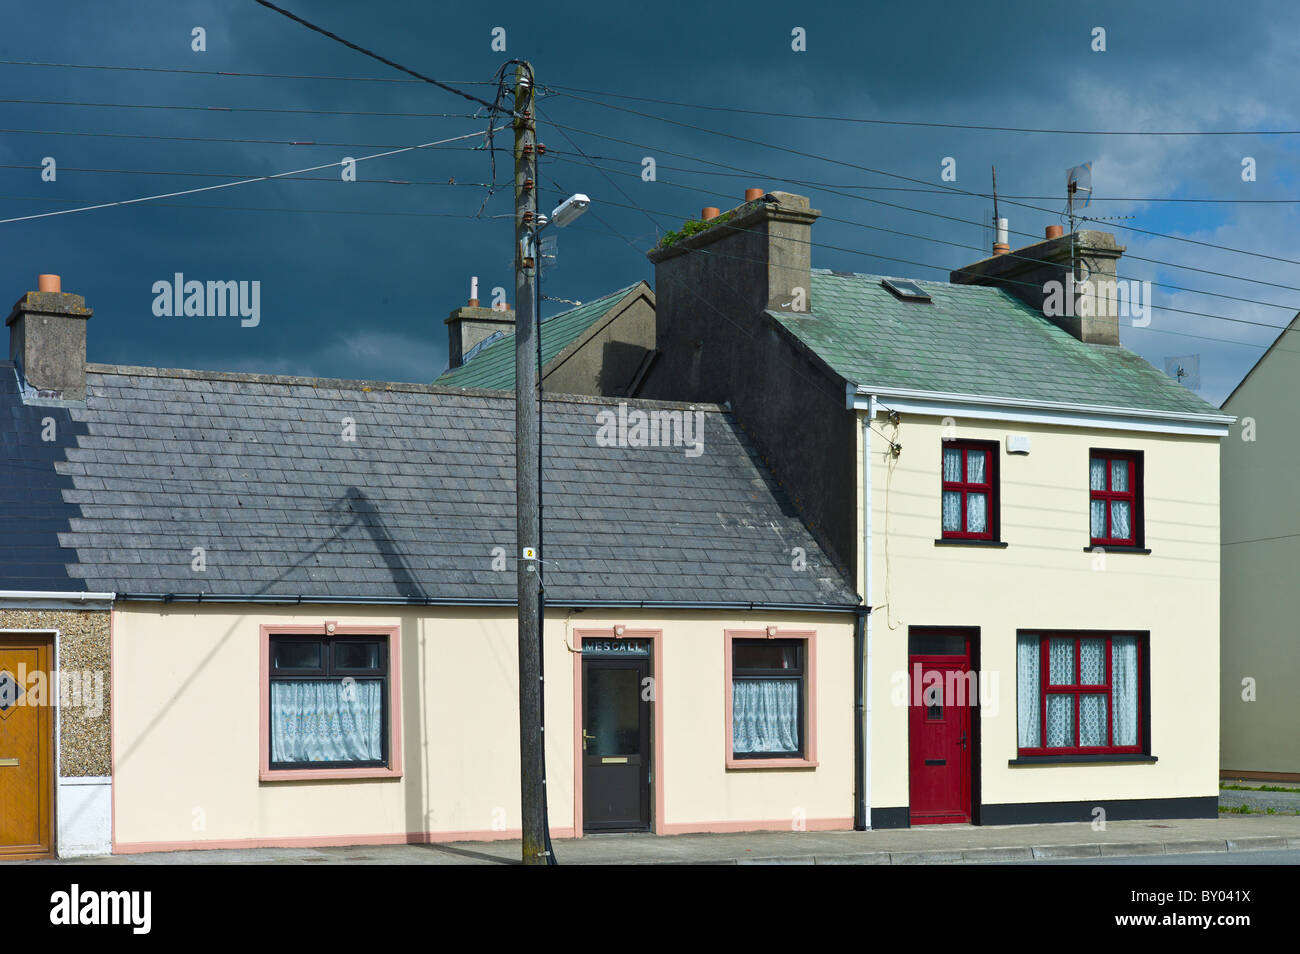 Street scene pastel painted terraced homes in Kilkee, County Clare, West of Ireland Stock Photo